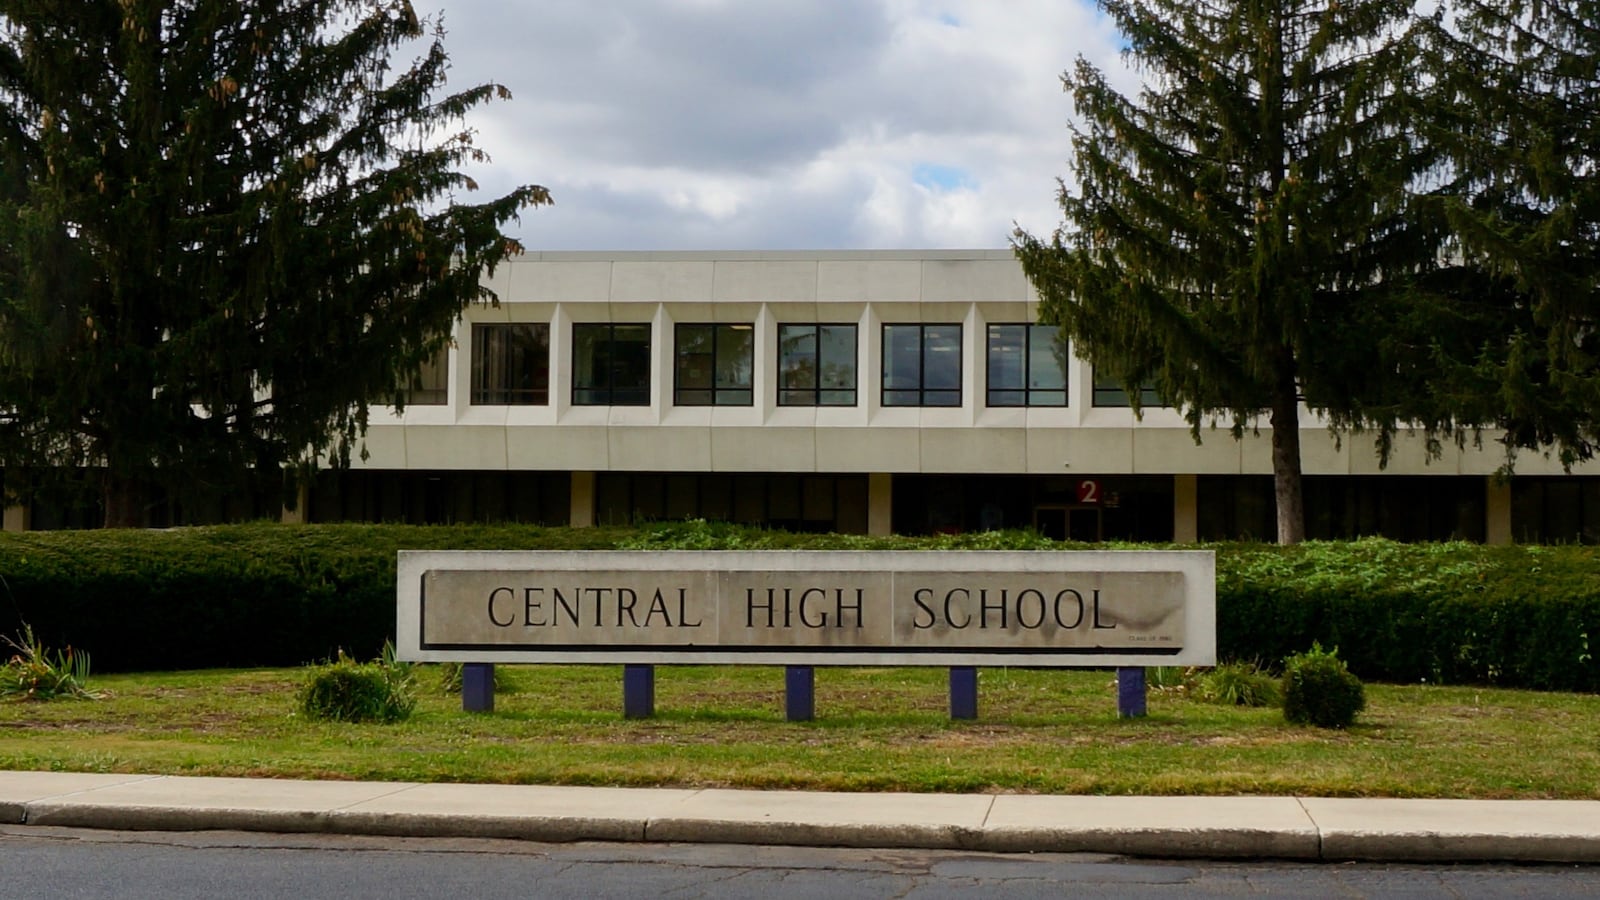 In the class of 2018, more Muncie Central High School students were labeled as leaving to home-school than at any other school in Indiana.